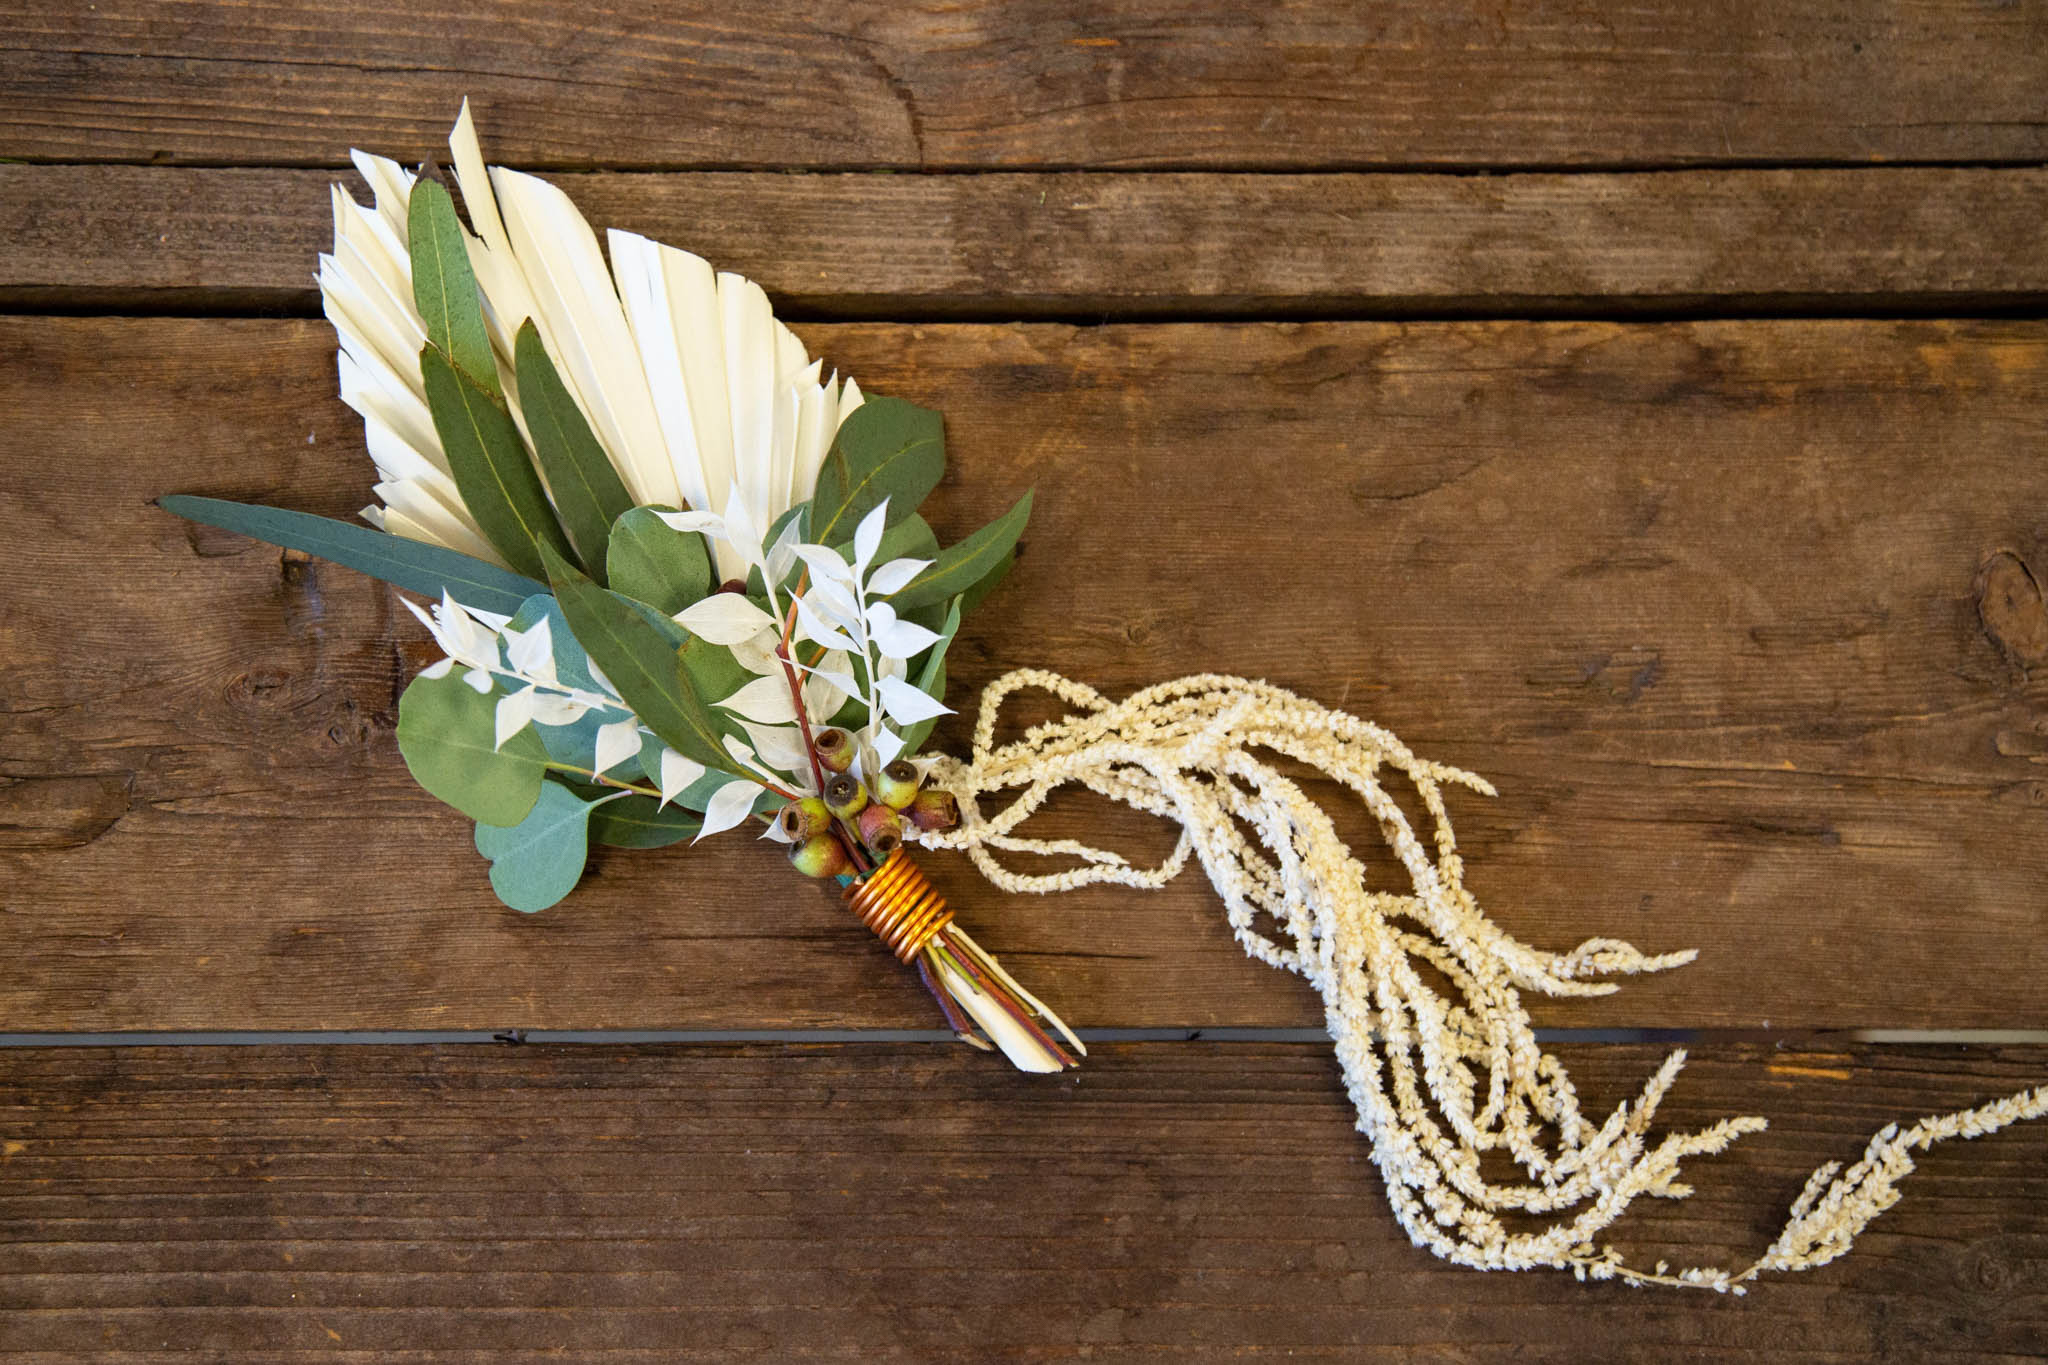 How to make a boutonniere: Example with greenery and dried palm